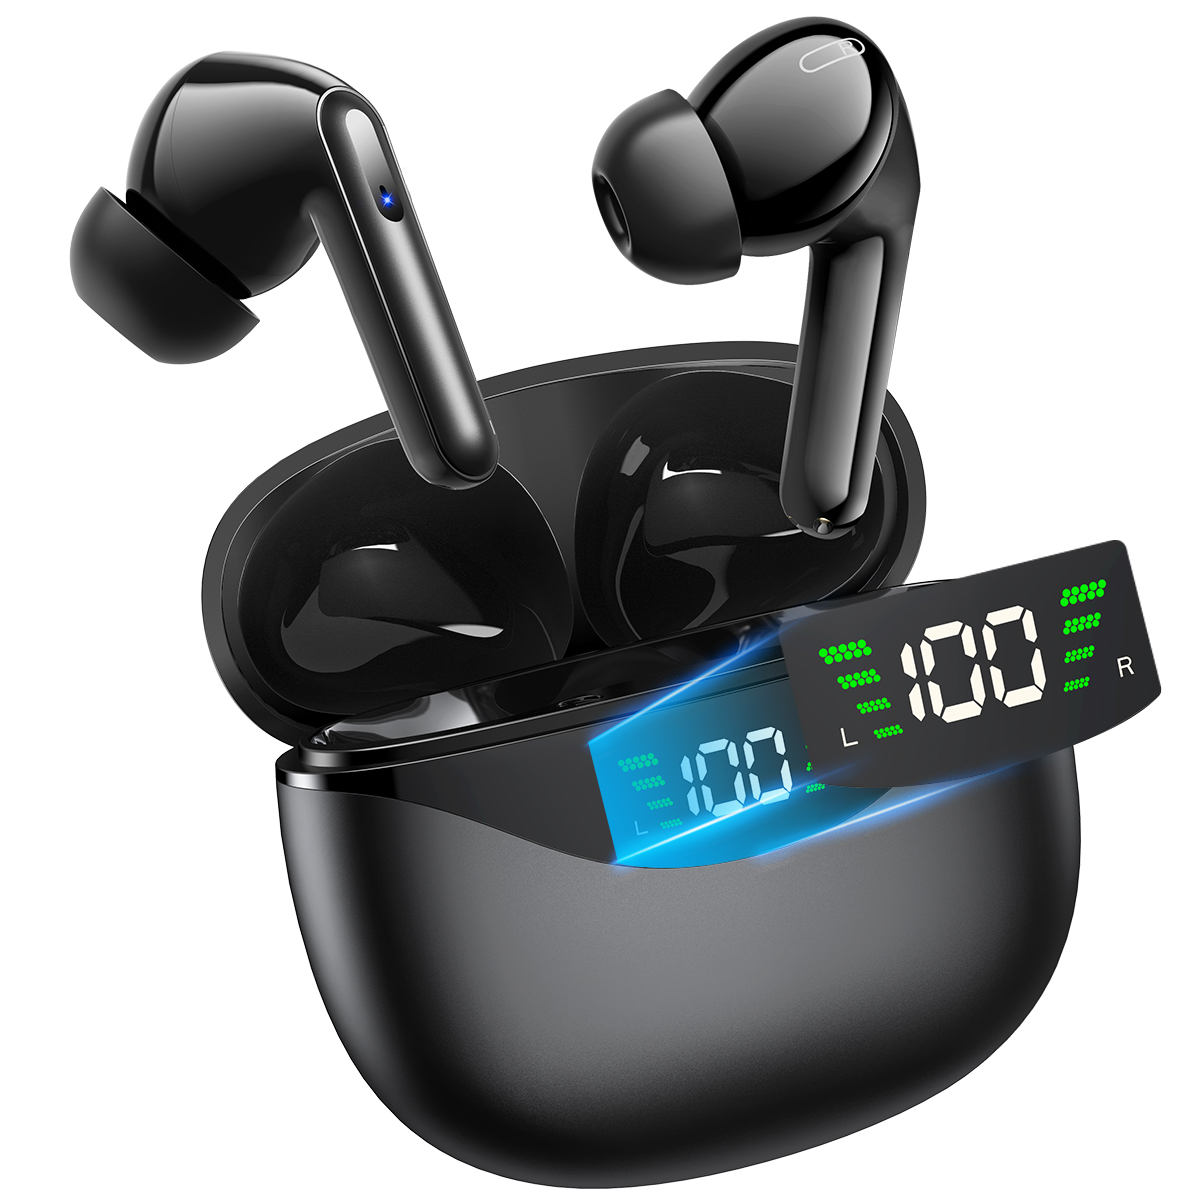 Wireless Earbuds, Bluetooth 5.1 Headphones 30Hrs Playtime with LED Power Display, IPX7 Waterproof Earphones, One-Step Pairing, TWS in Ear Stereo Headset Built-in Mic for iPhone/Android (Black) - image 1 of 7